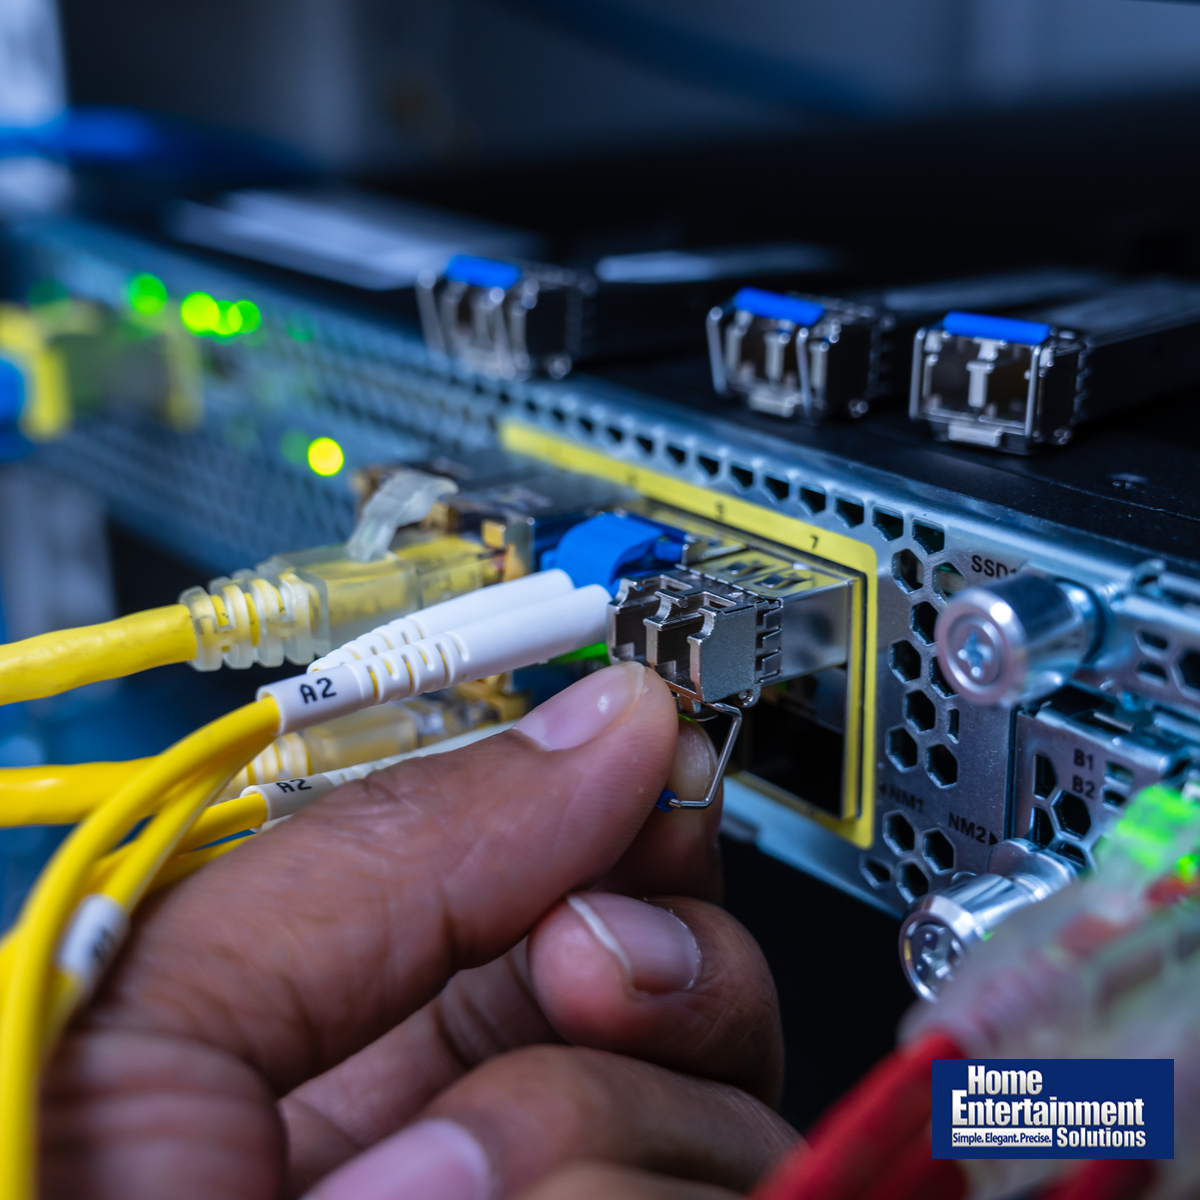 Are You Looking For Skilled Technicians To Handle Home Networking Installation?